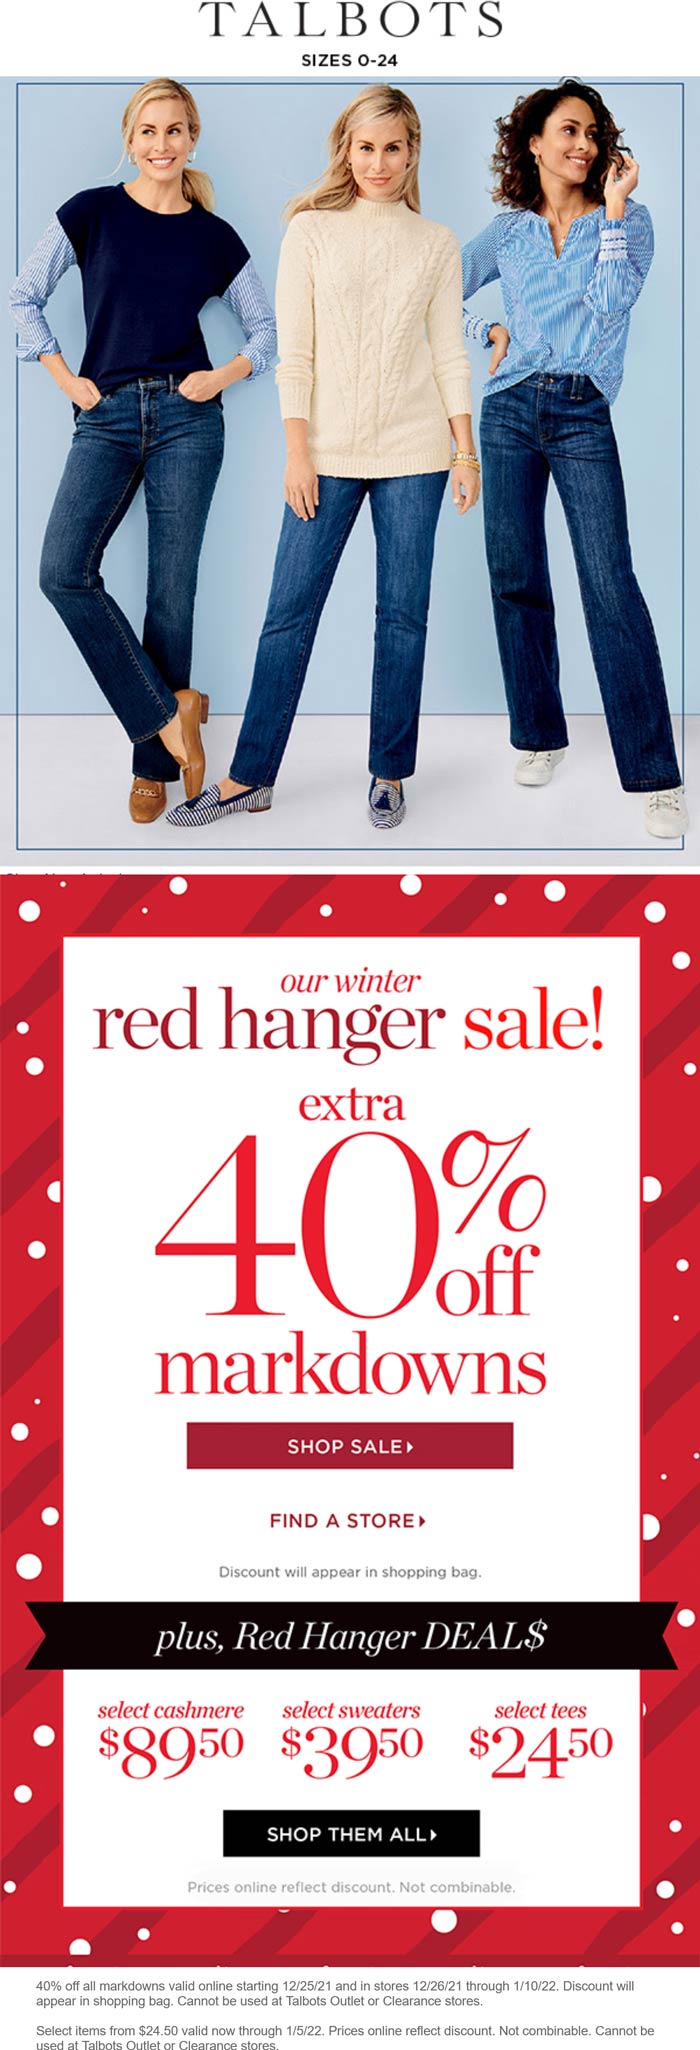 Talbots coupons & promo code for [December 2022]